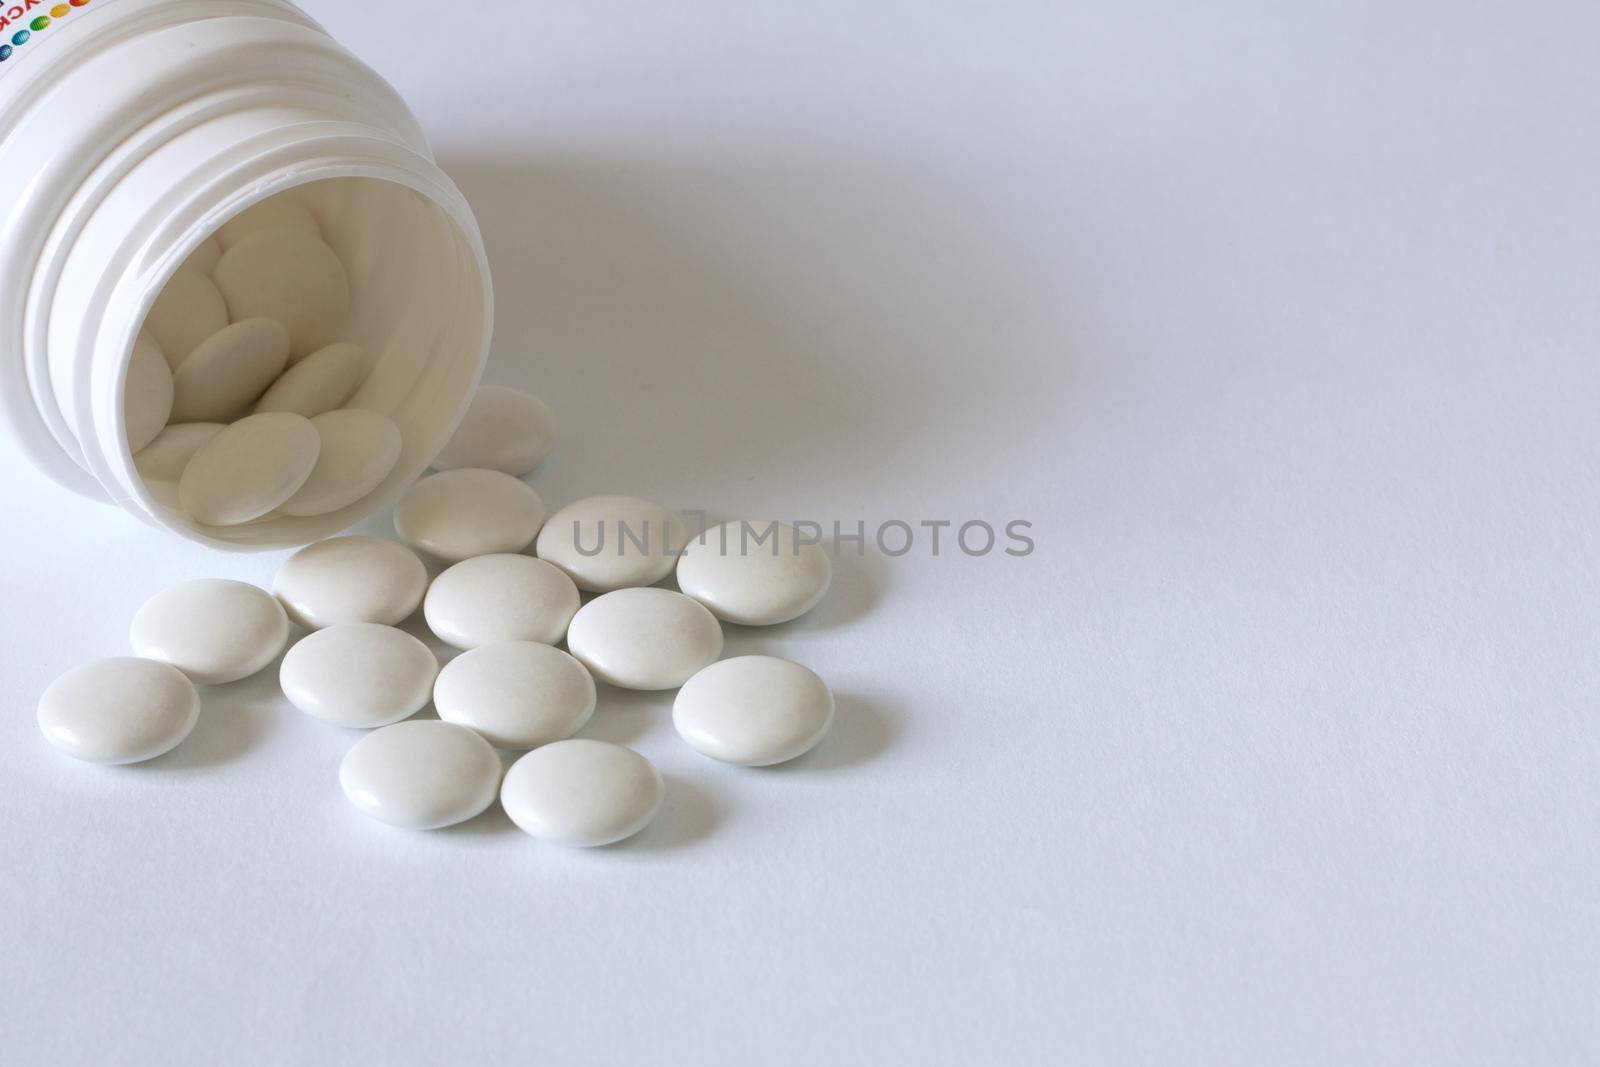 Pills from a jar on a light background